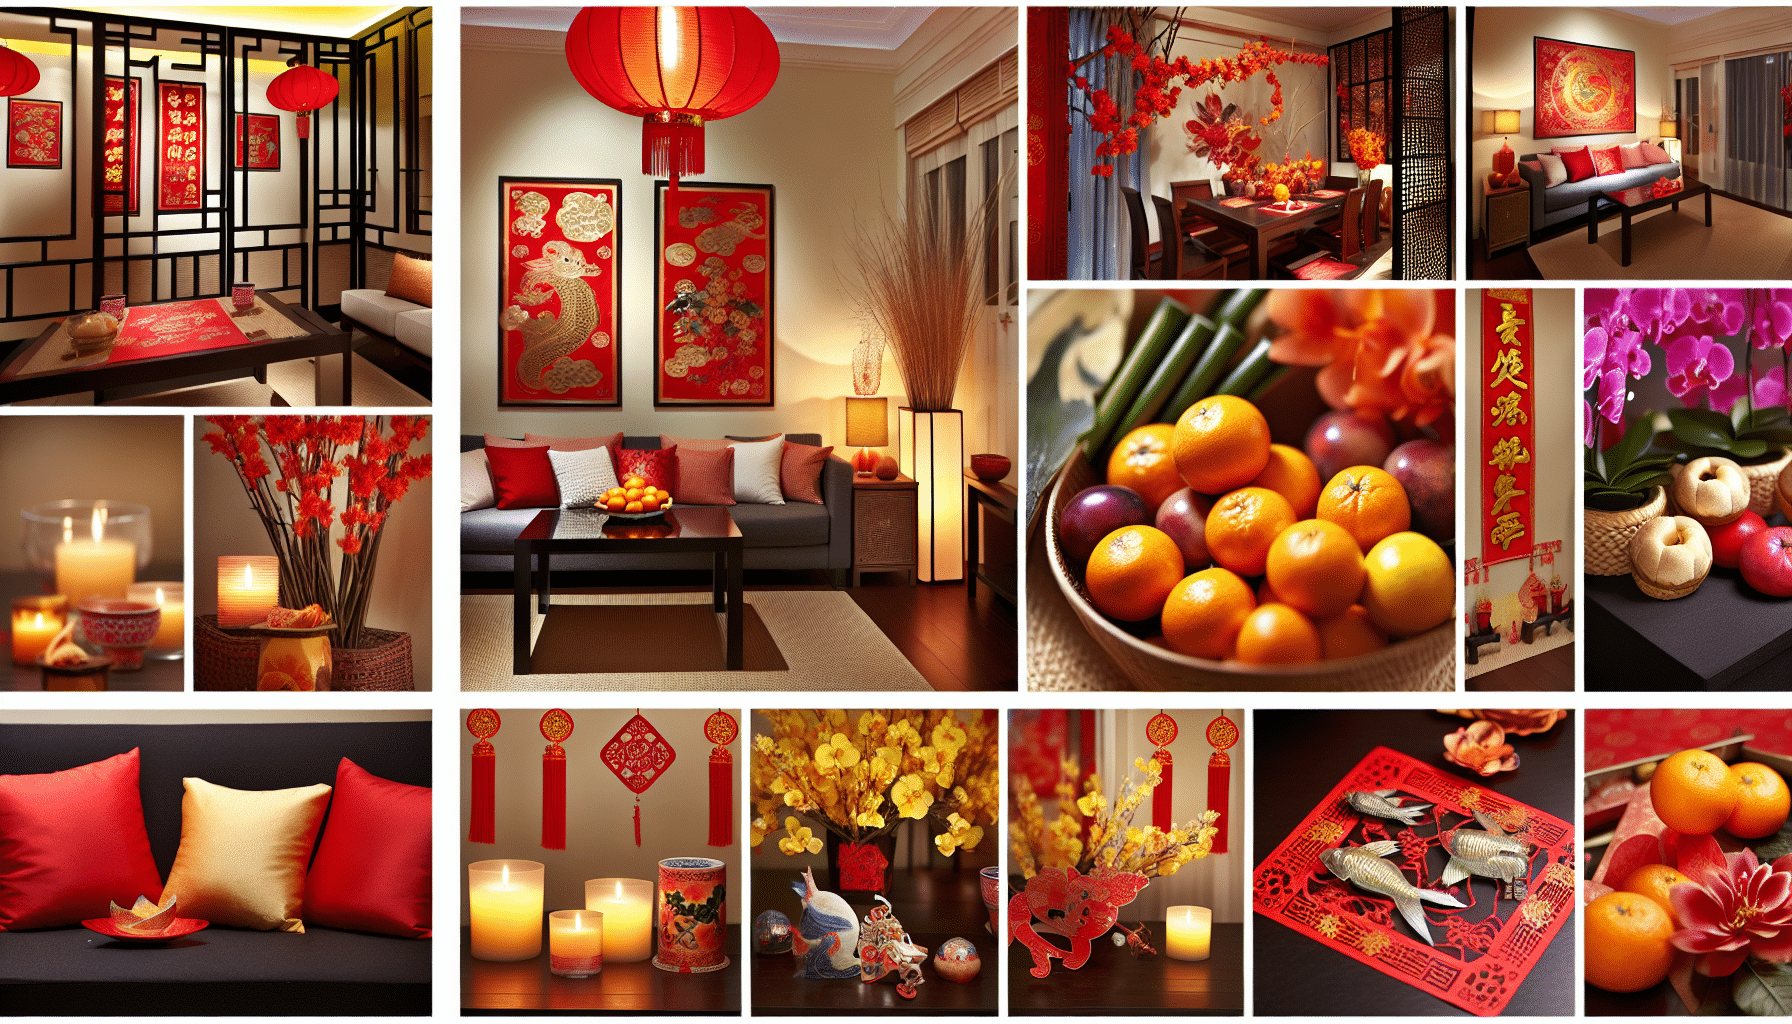 Bring in the fortune: stylize your home for Chinese New Year with this killer guide!